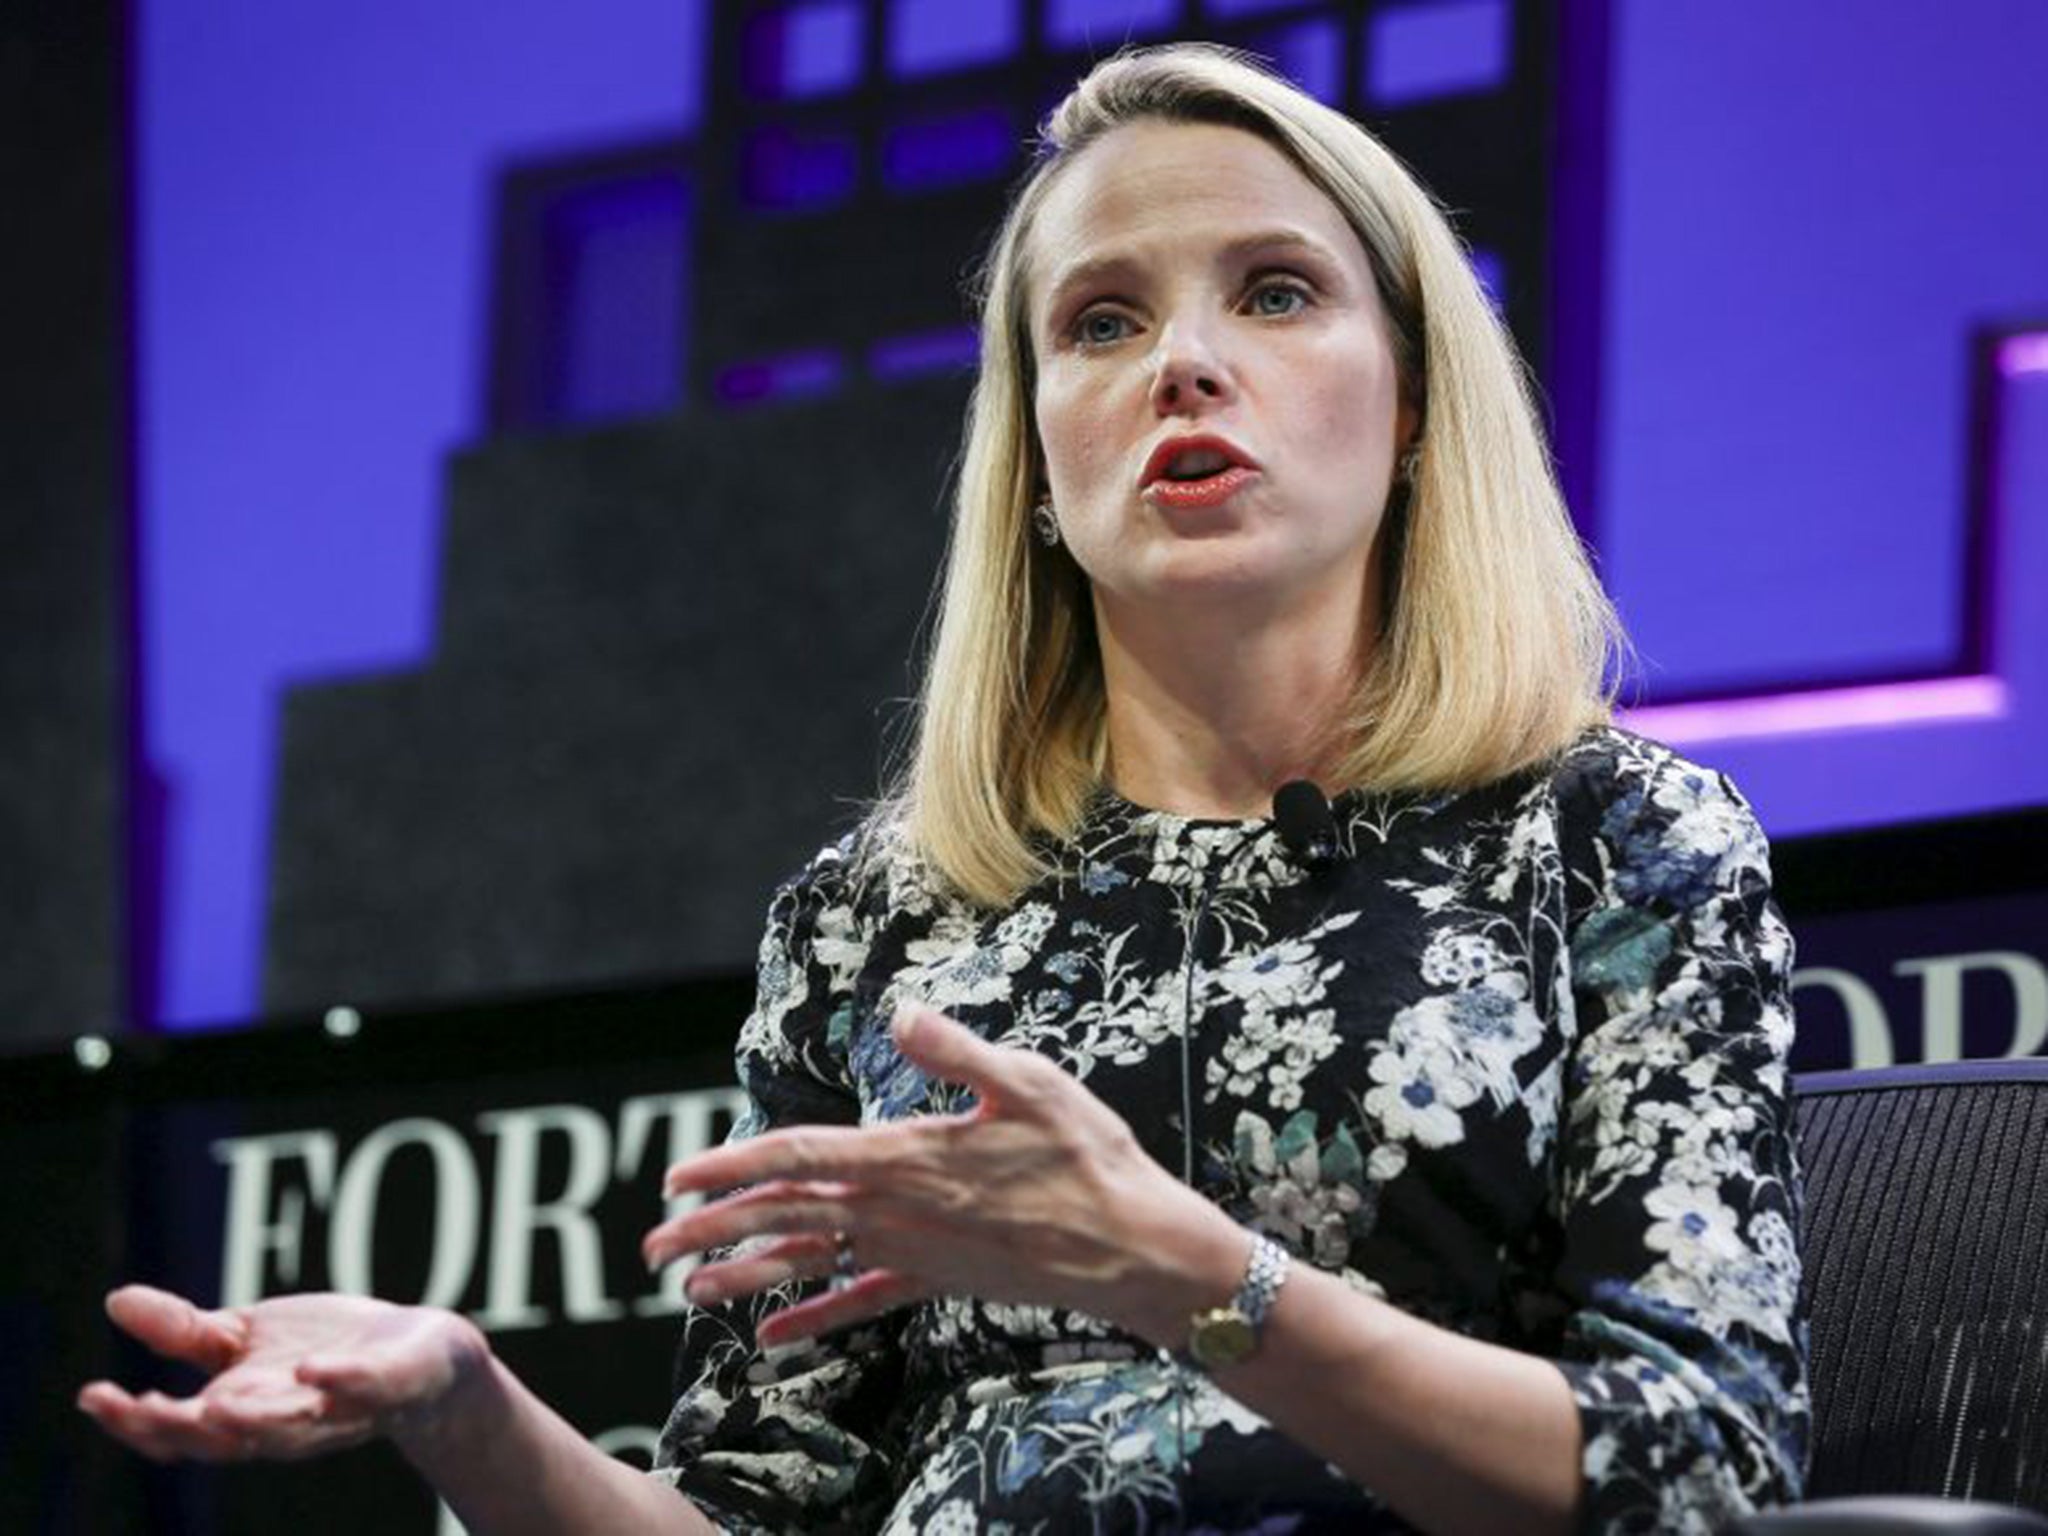 Profits and revenues at Yahoo beat expectations under Marissa Mayer, the chief executive